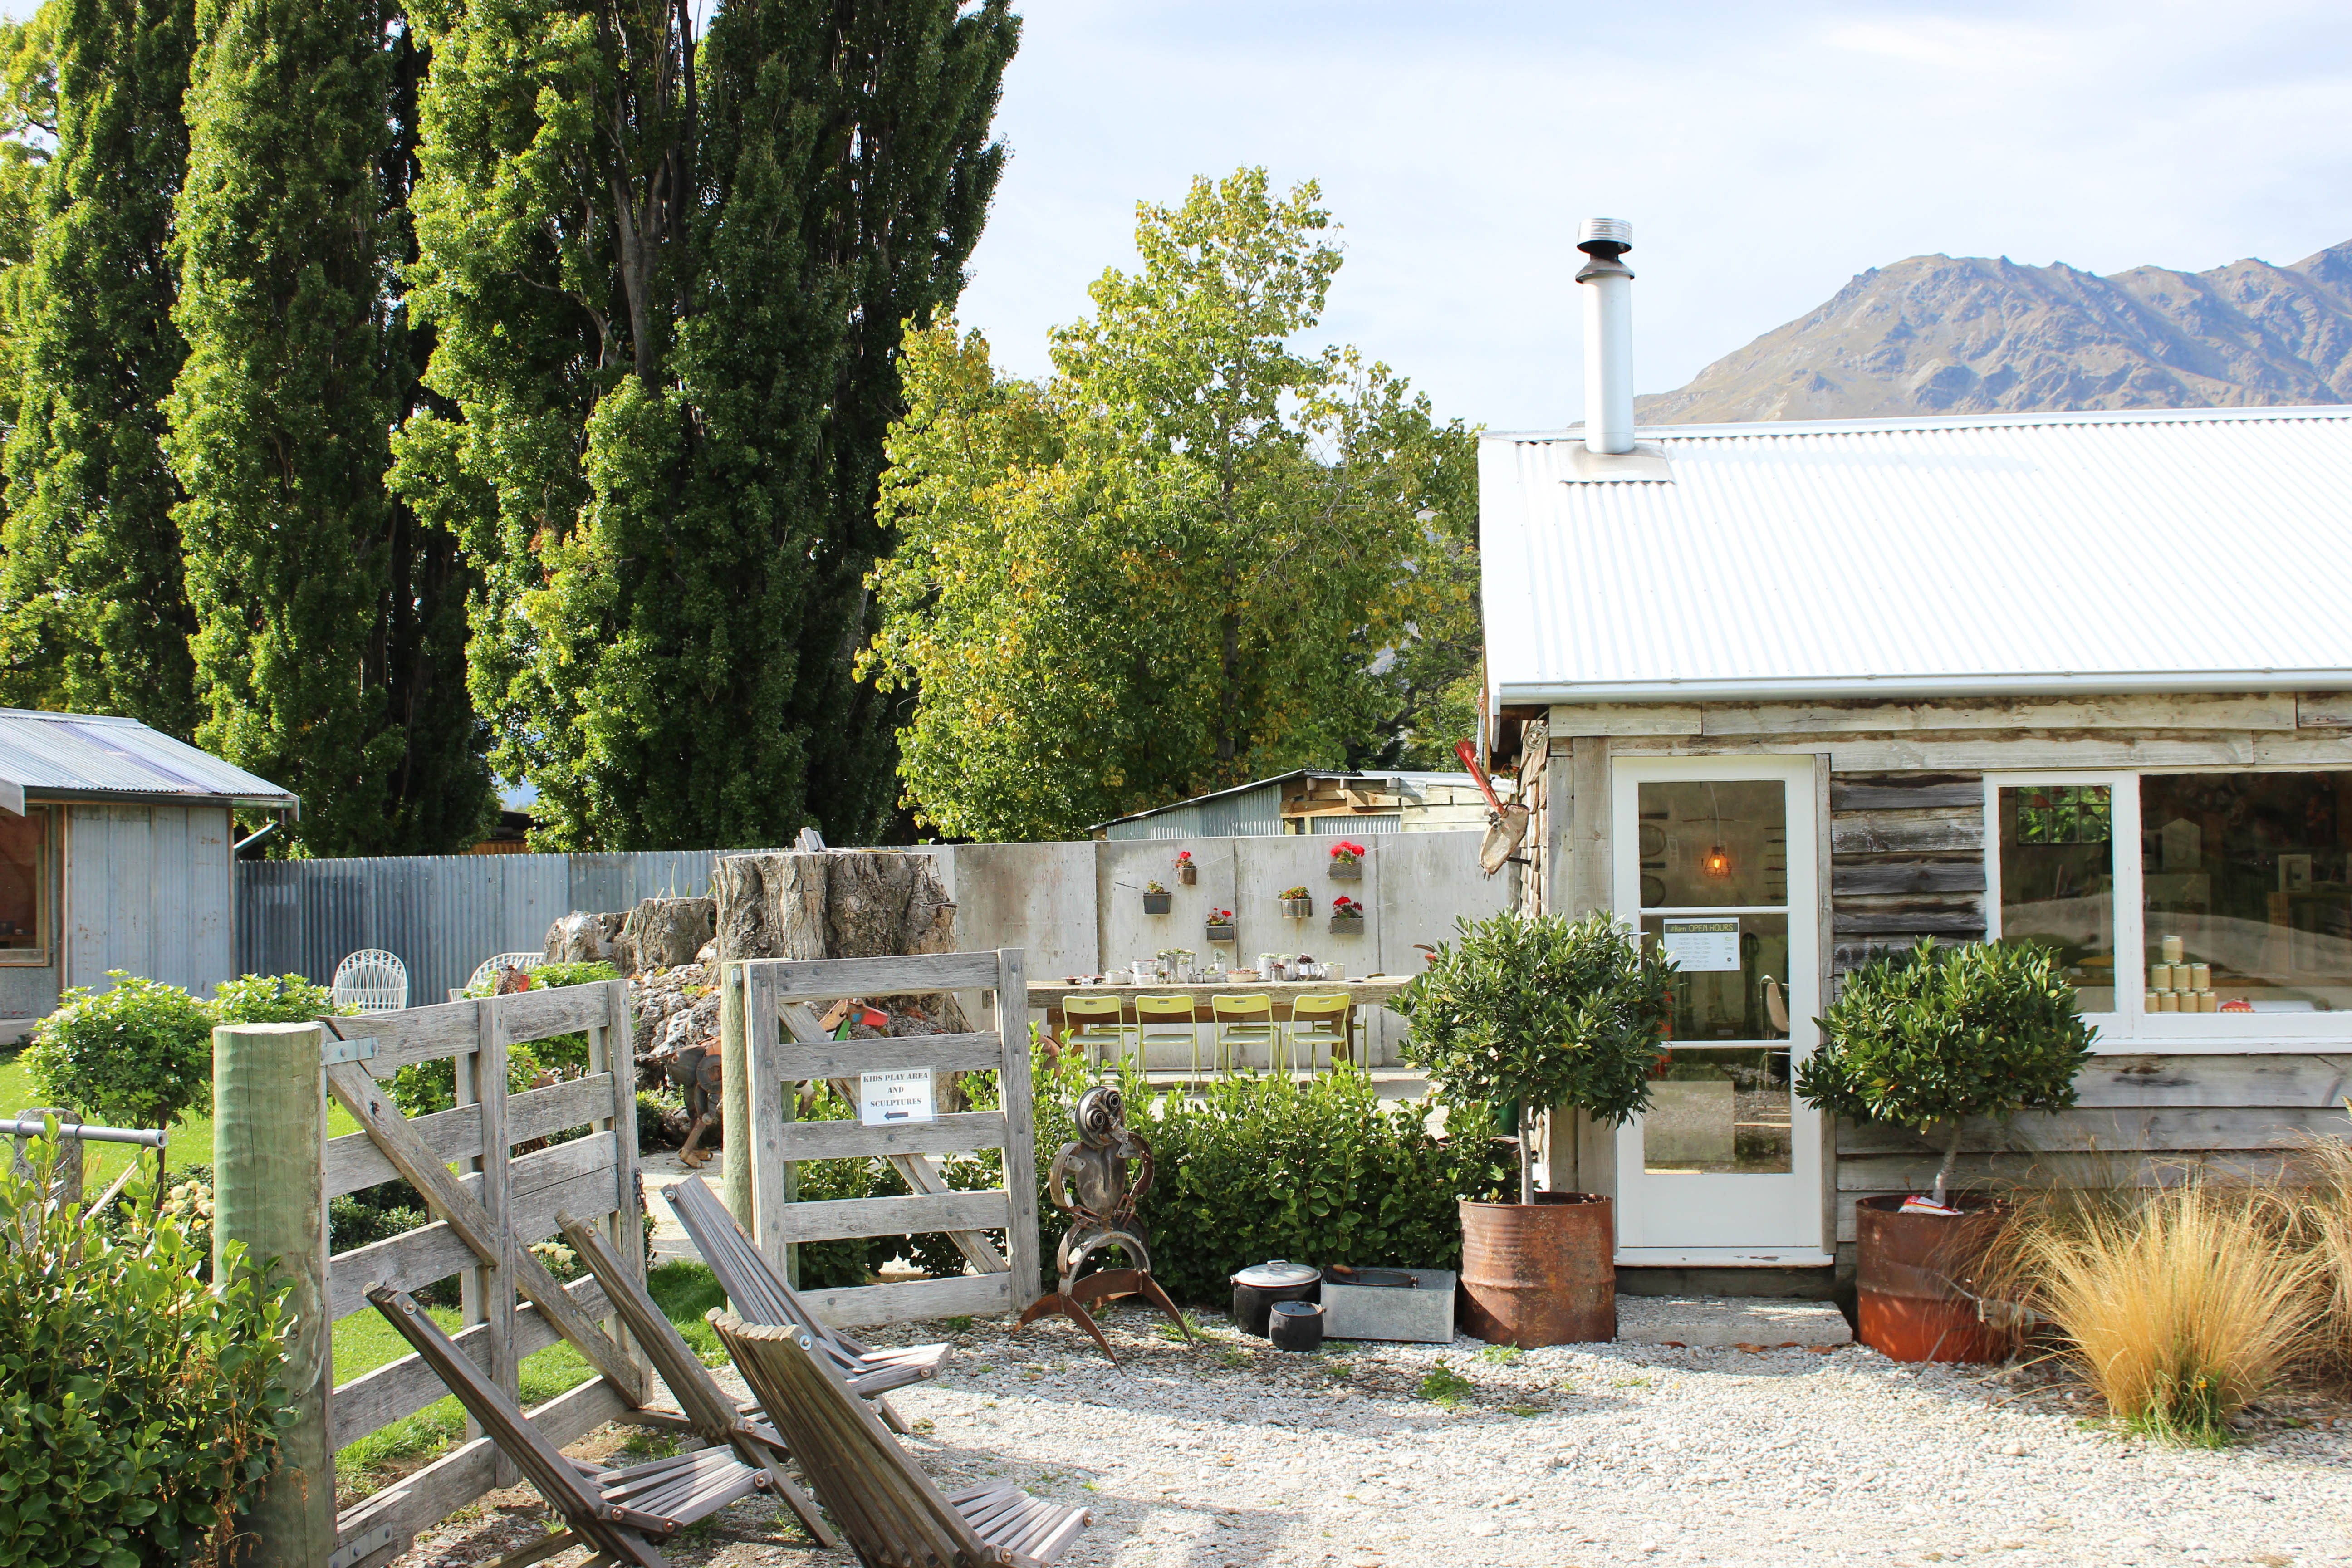 Local_Shops_To_Visit_when_Shopping_in_Queenstown_NZ